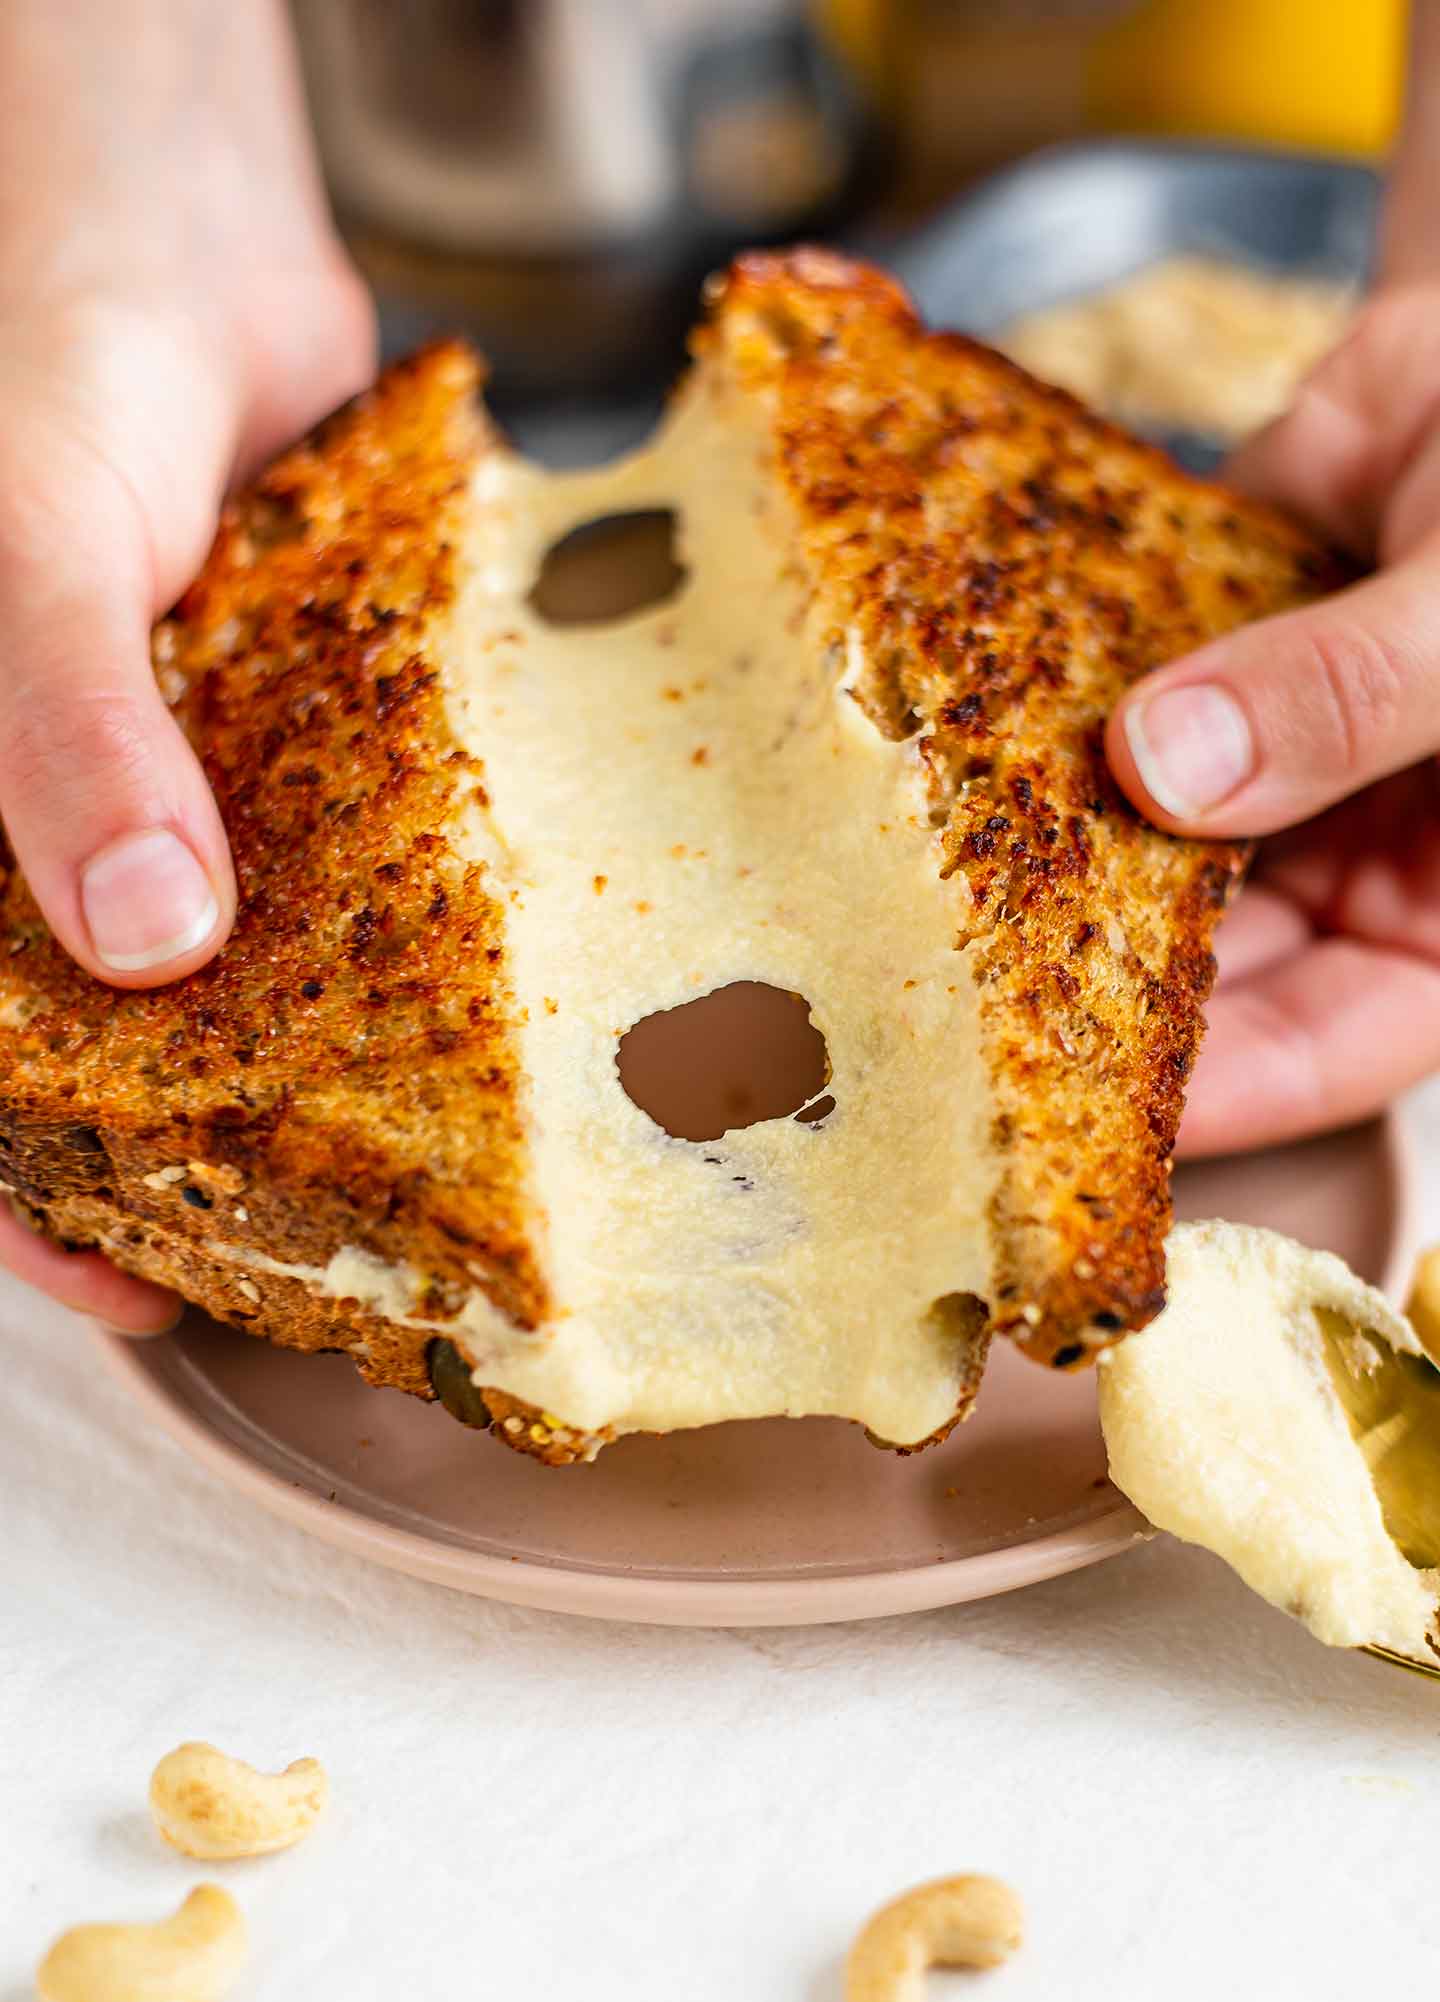 Side view of hands pulling two halves of a grilled cheese sandwich apart. The cheese is a stretchy cashew mozzarella that stretches dramatically between the two halves.